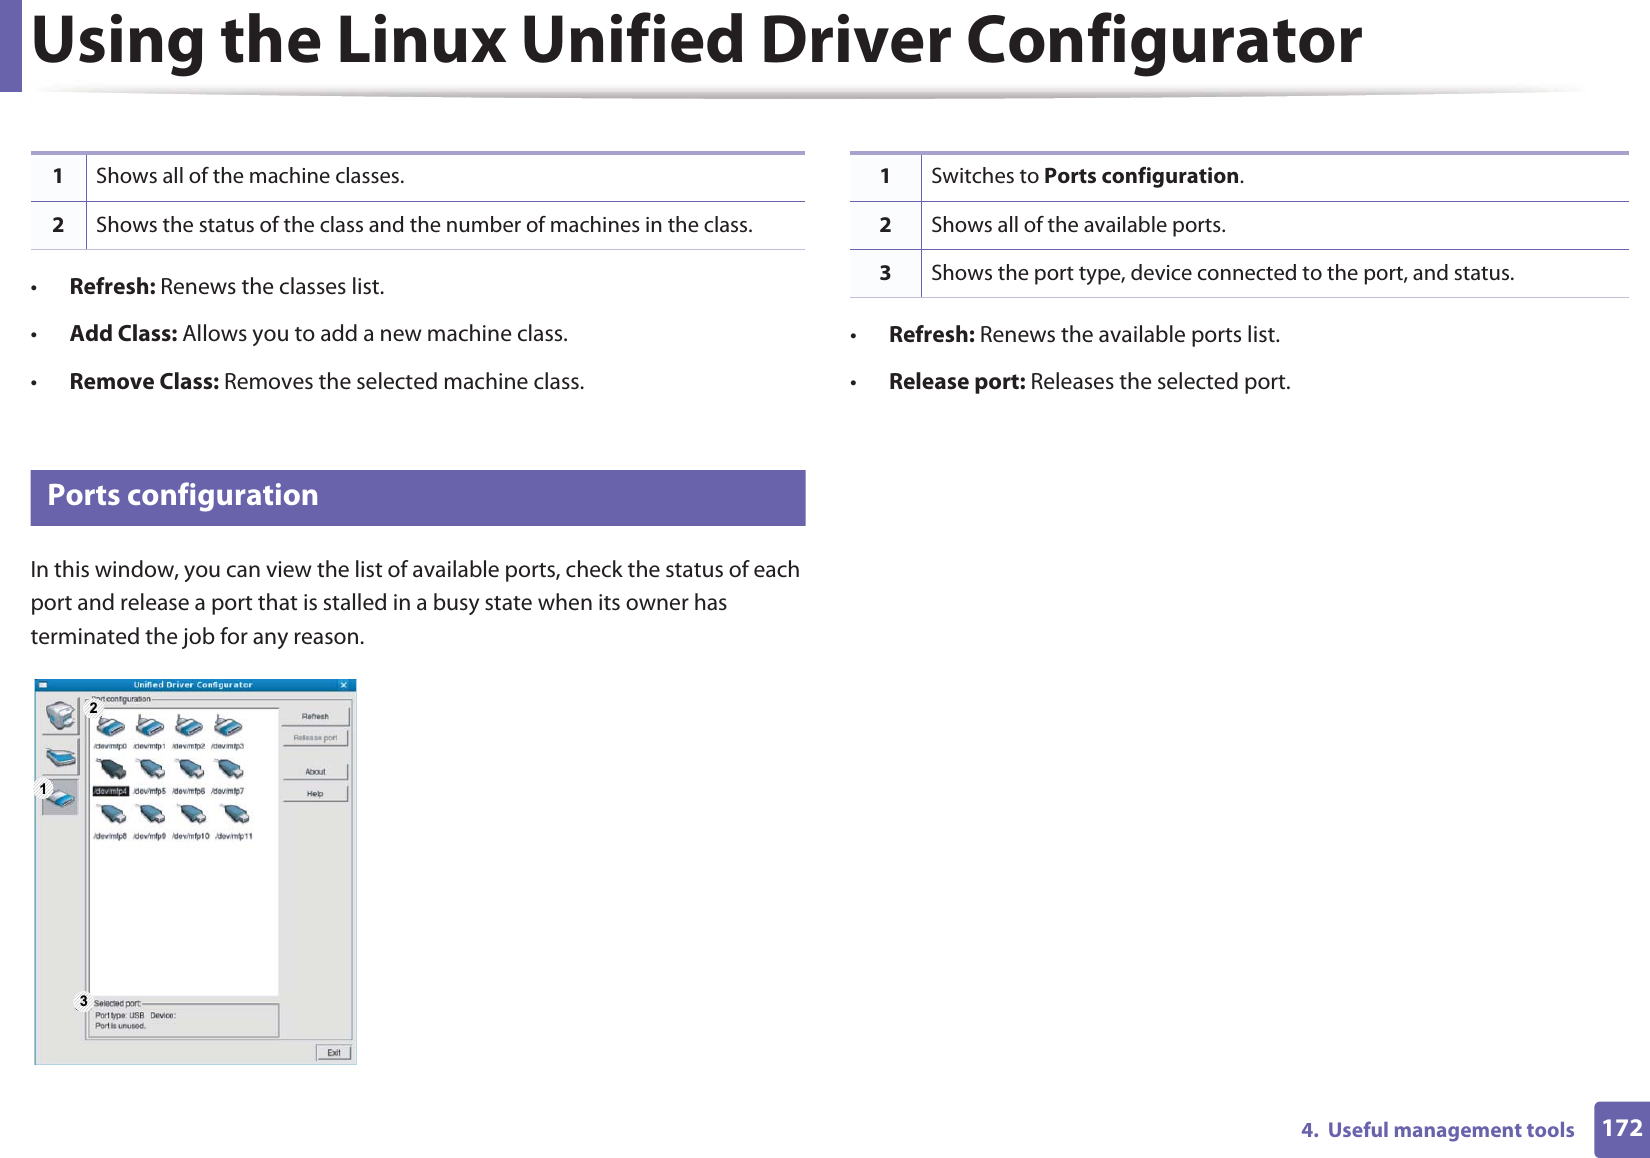 Using the Linux Unified Driver Configurator1724.  Useful management tools•Refresh: Renews the classes list.•Add Class: Allows you to add a new machine class.•Remove Class: Removes the selected machine class.12 Ports configurationIn this window, you can view the list of available ports, check the status of each port and release a port that is stalled in a busy state when its owner has terminated the job for any reason.•Refresh: Renews the available ports list.•Release port: Releases the selected port.1Shows all of the machine classes.2Shows the status of the class and the number of machines in the class.1 231Switches to Ports configuration.2Shows all of the available ports.3Shows the port type, device connected to the port, and status.